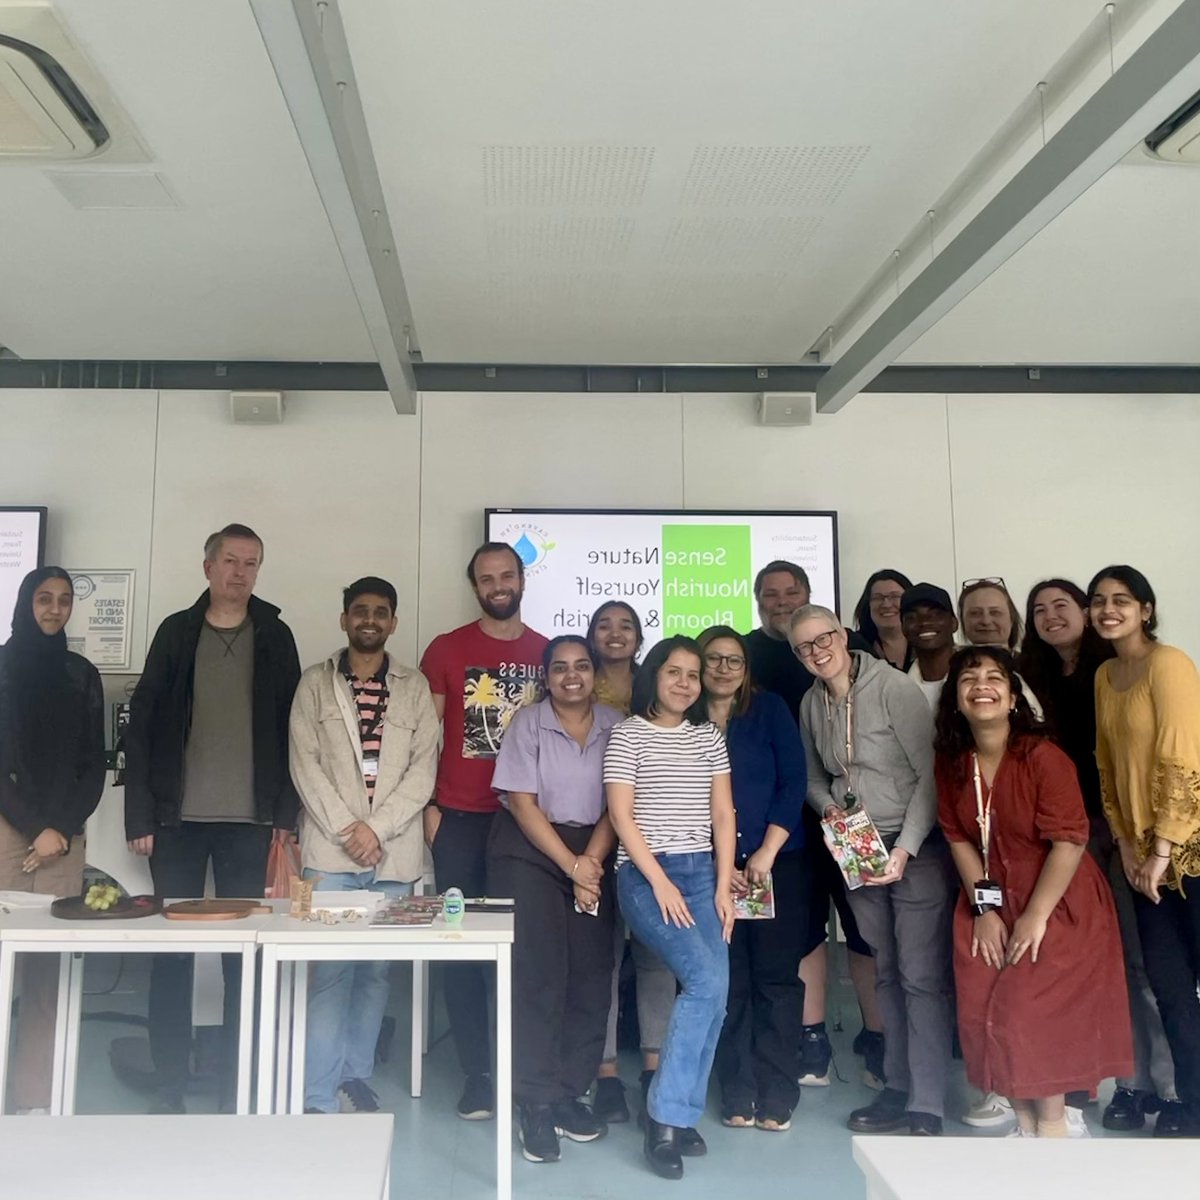 Thank you to everyone who joined us at our Mental Health & Sustainable Living Forum. Lots of engaging discussions, hands on activities, and an appreciation for the connection between nature, mindful eating, and our overall well-being.
@JustinHaroun @UoWSustainable @UniWestminster